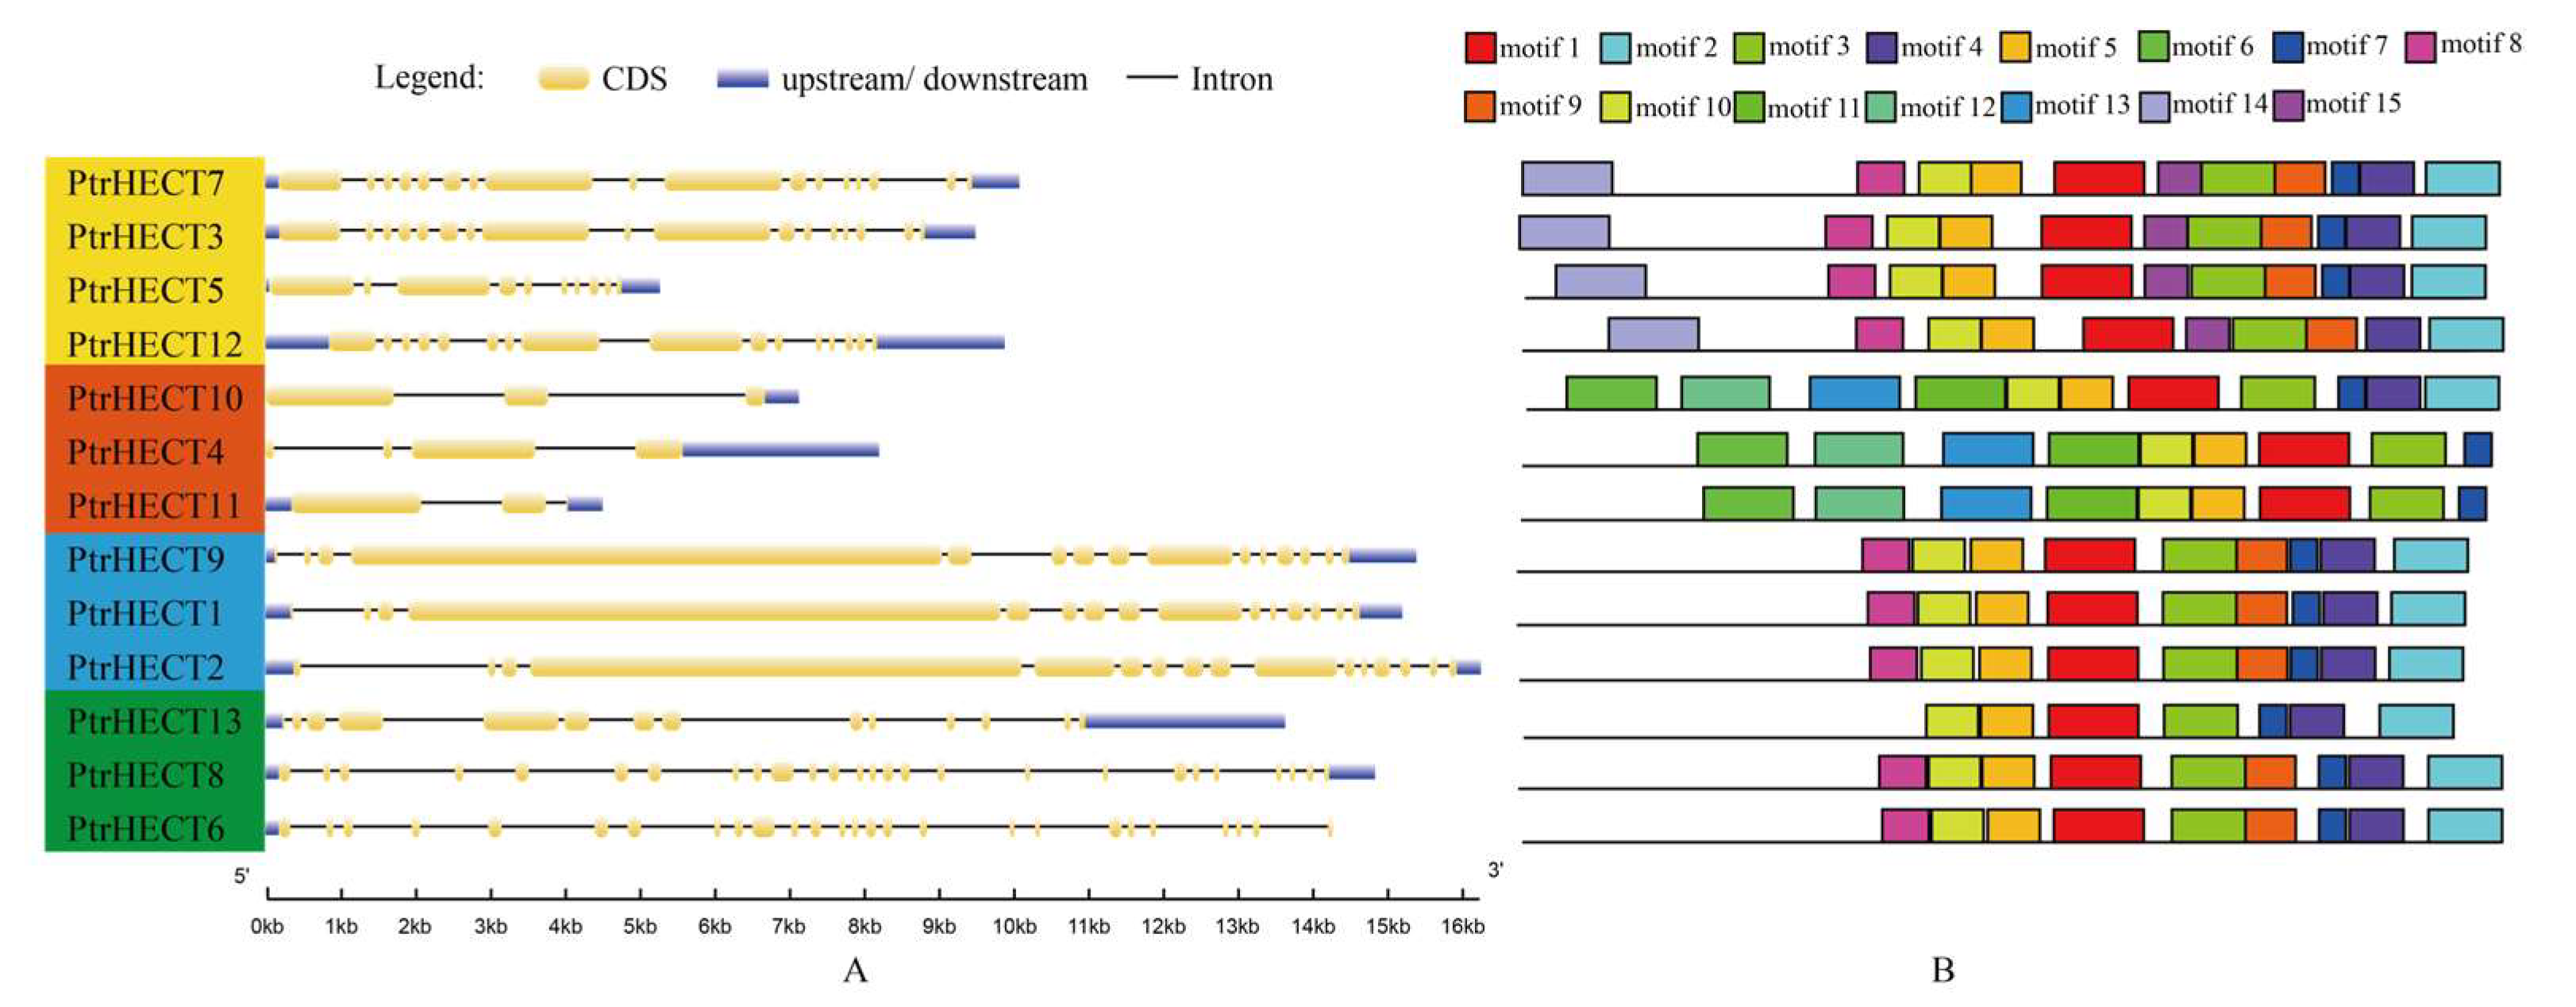 Forests | Free Full-Text | Genome-Wide Analysis of Homologous E6-AP ...